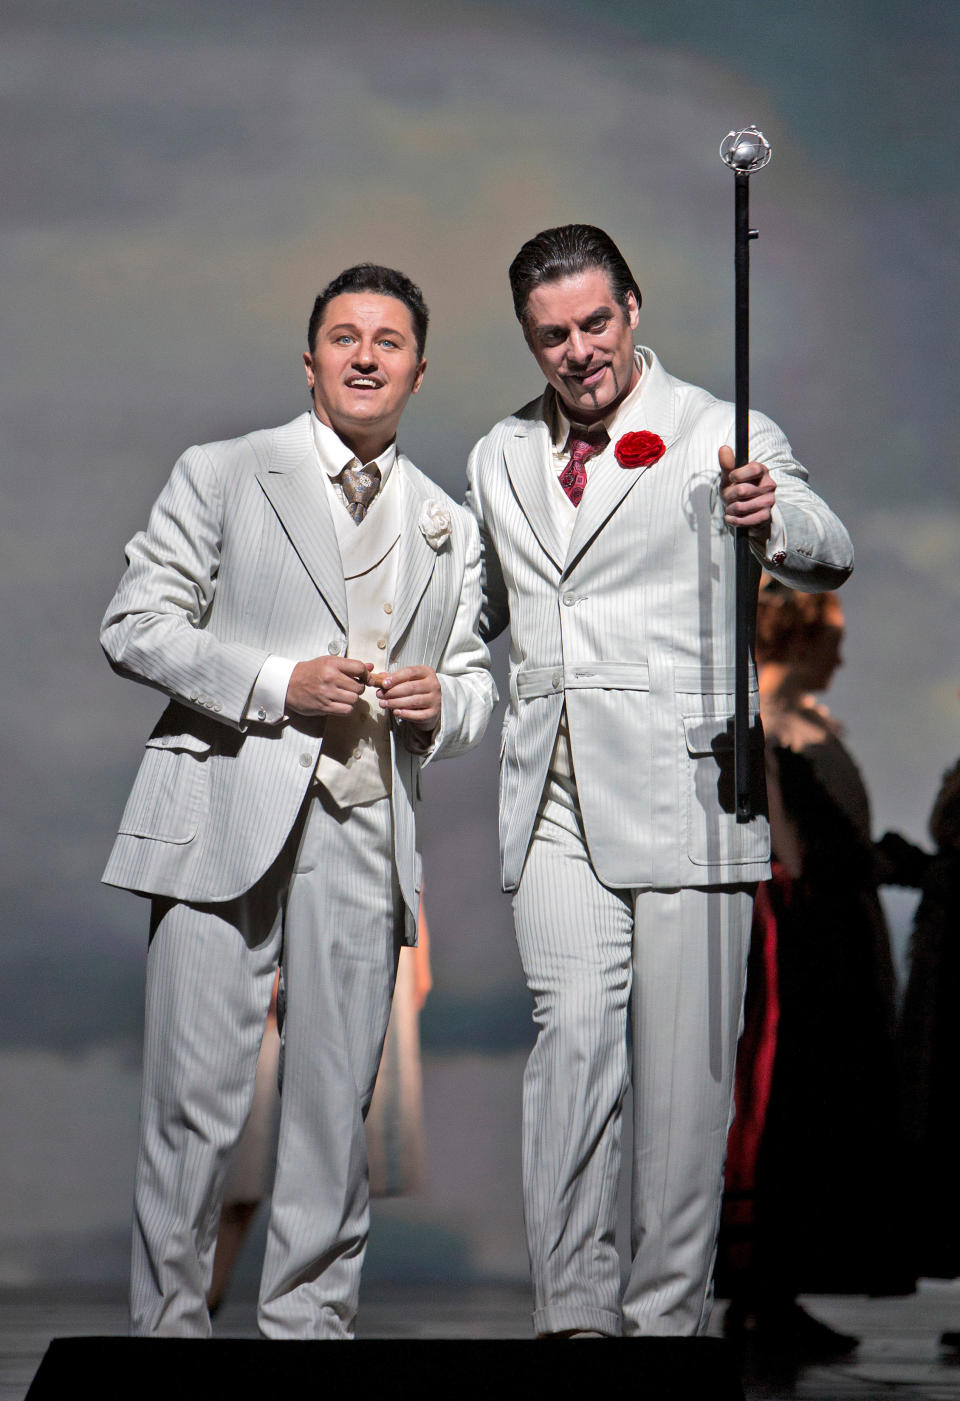 In this March 18, 2013 photo provided by the Metropolitan Opera, Piotr Beczala is Faust and John Relyea is Méphistophélès during a dress rehearsal of “Faust” at the Metropolitan Opera in New York. (AP Photo/Metropolitan Opera, Cory Weaver)